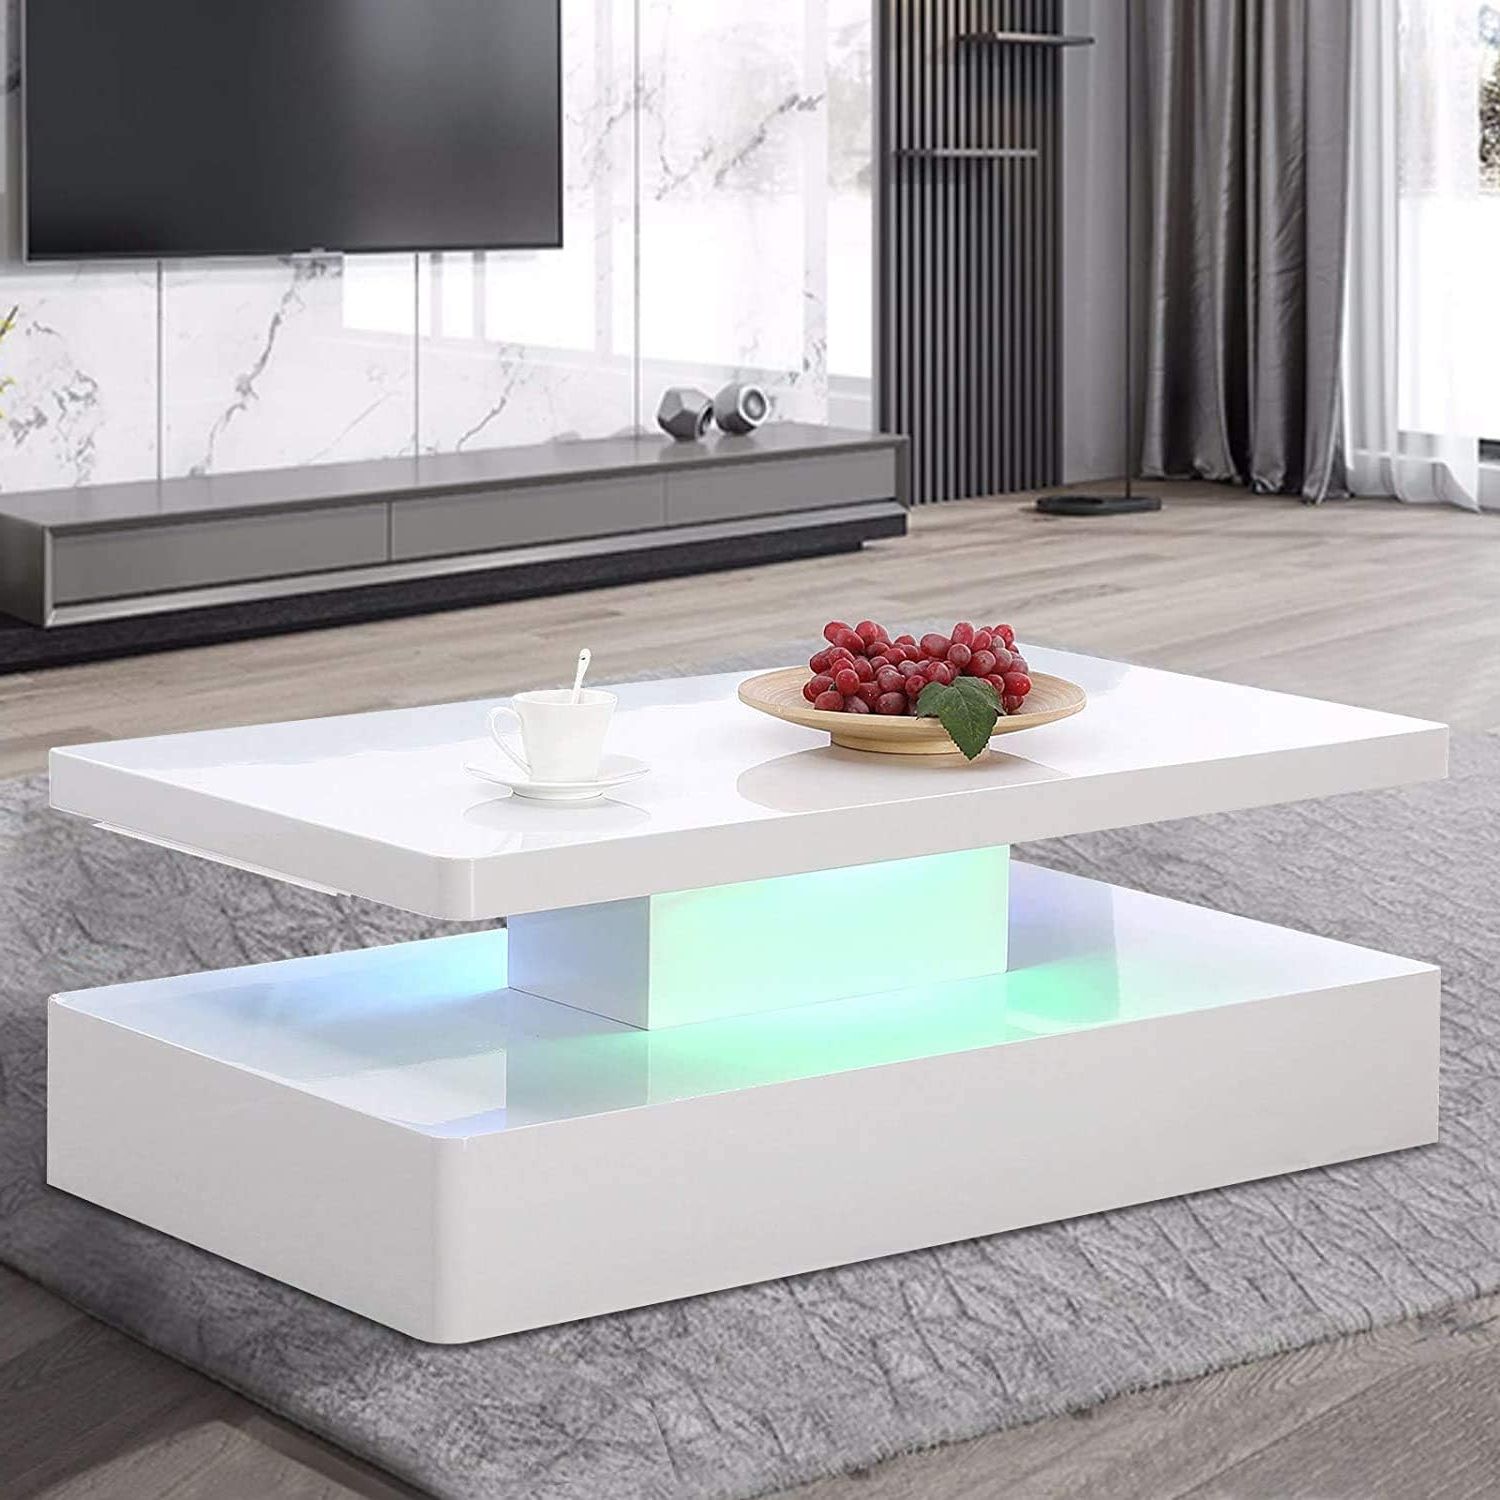 Preferred Amazon: Mecor Modern Glossy White Coffee Table W/led Lighting, 2 With Regard To Rectangular Led Coffee Tables (Photo 4 of 15)